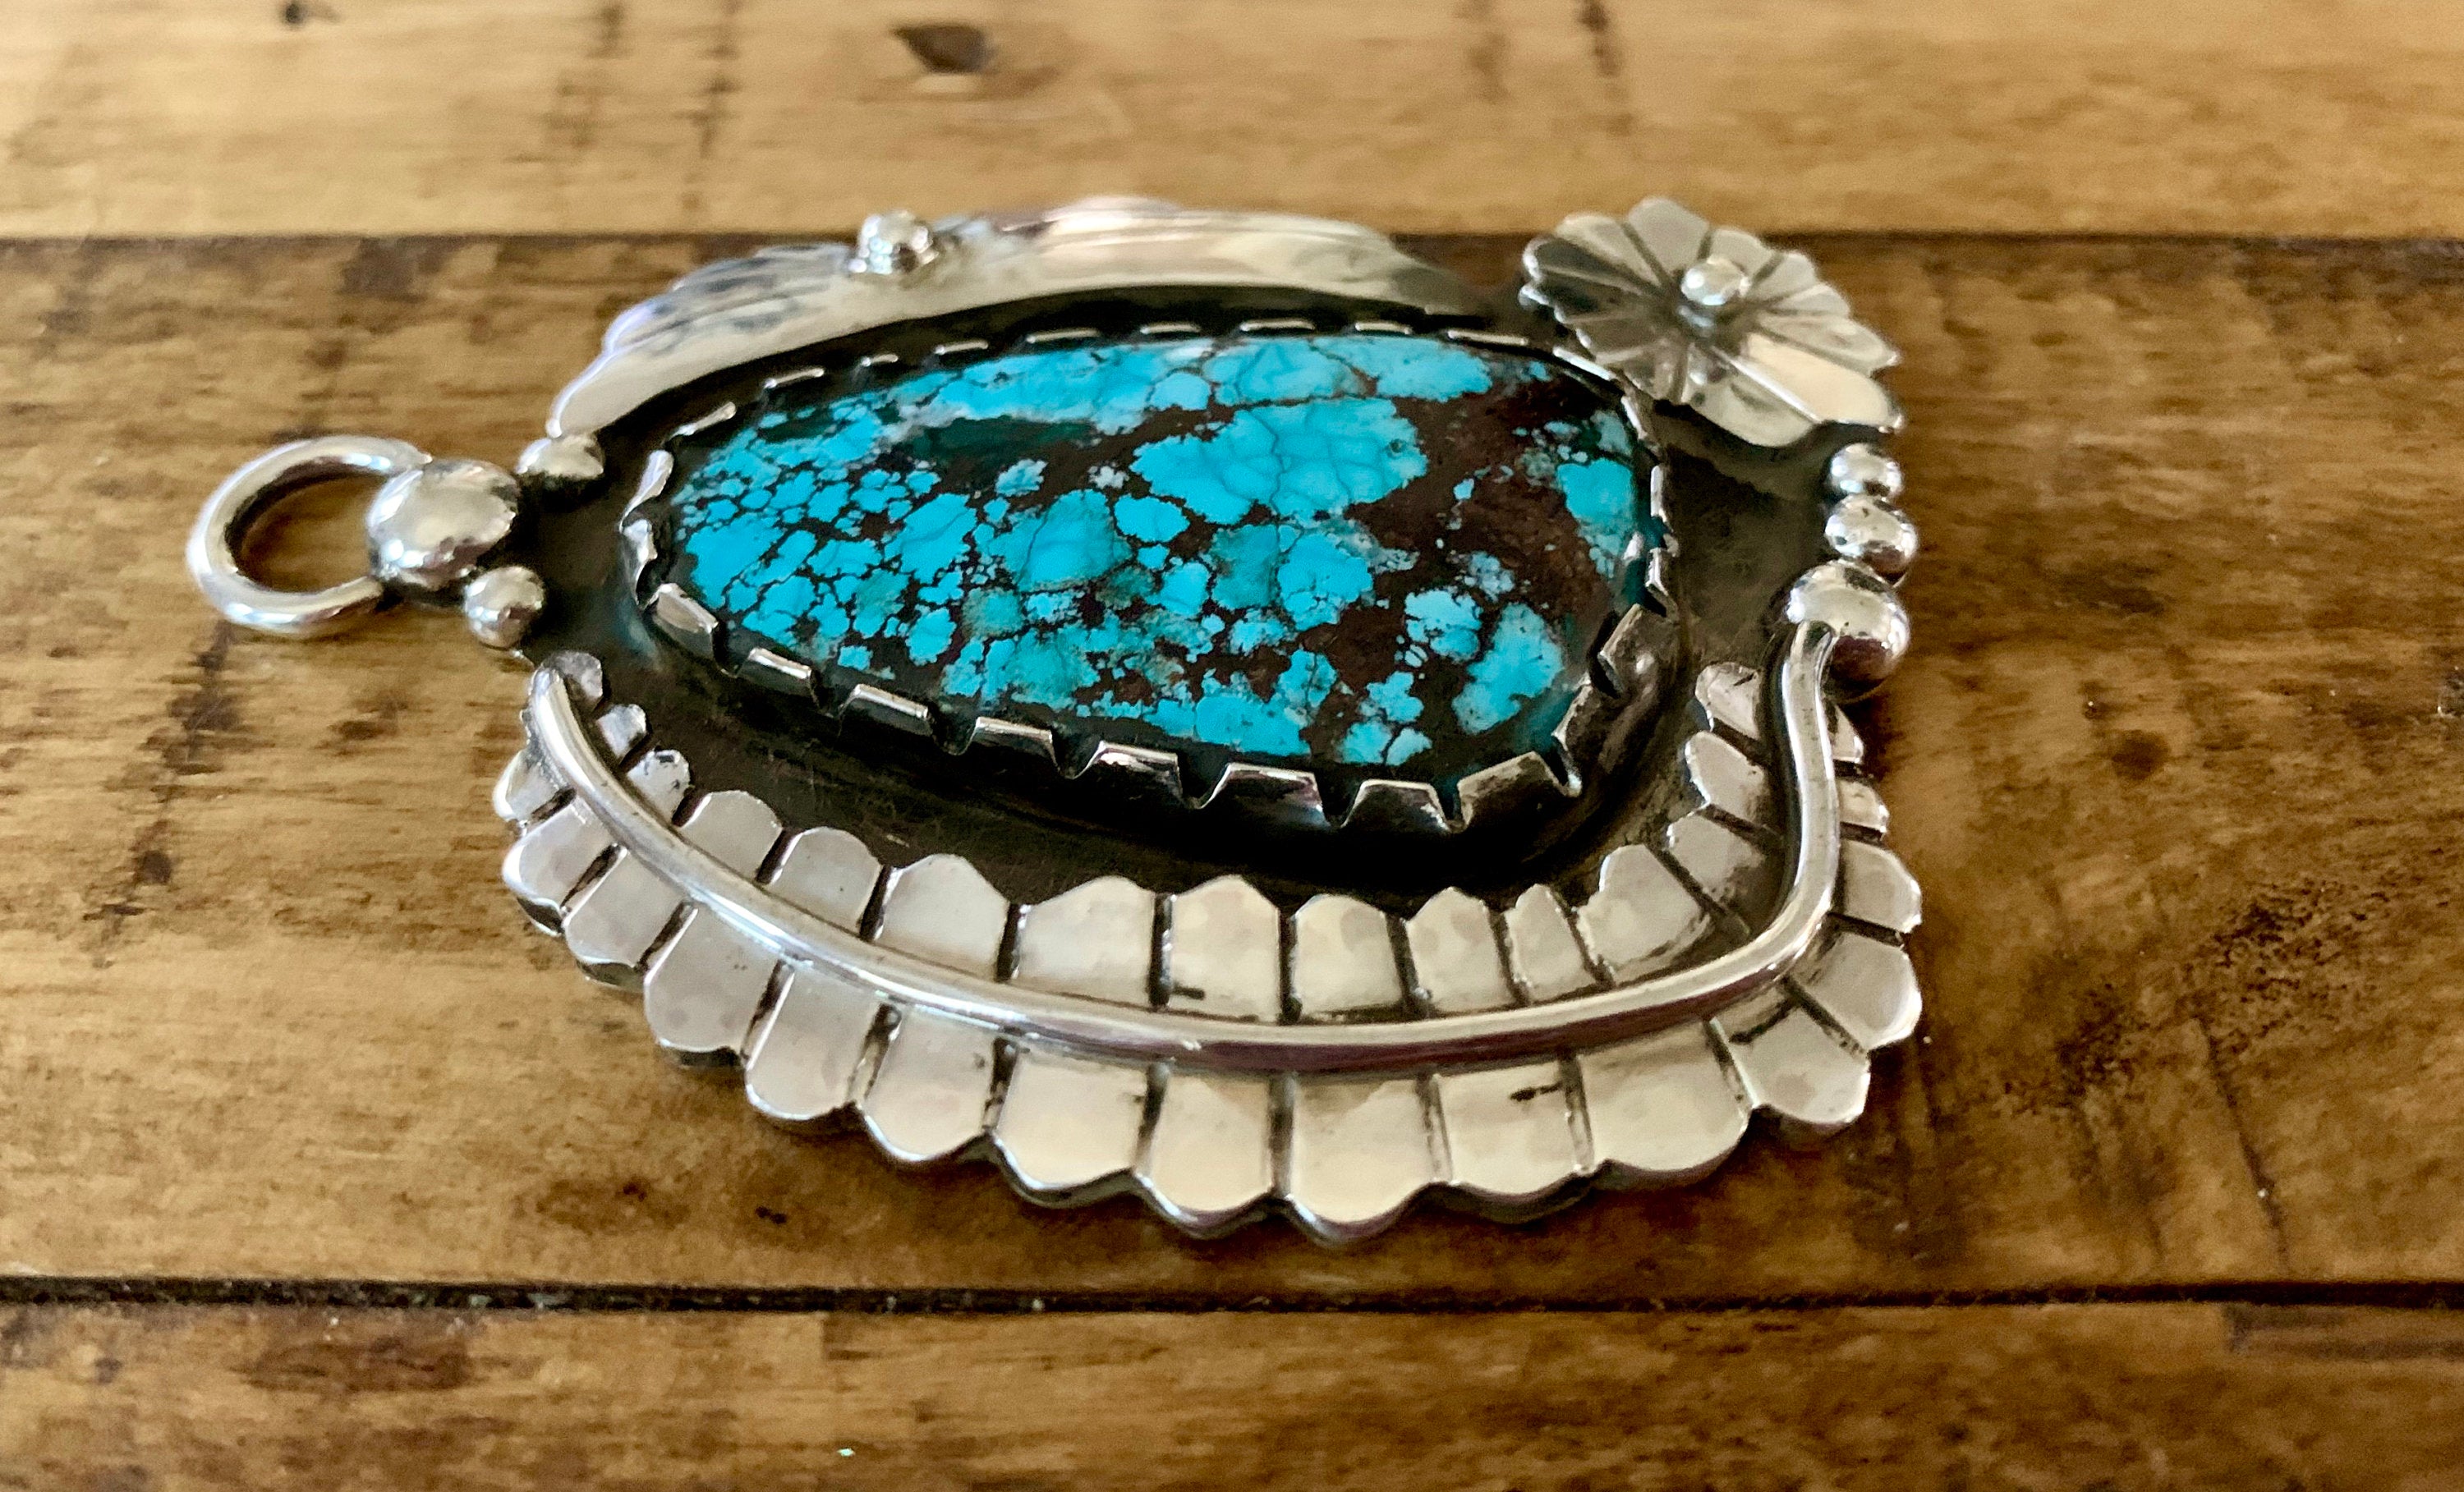 Muheeka Sterling Silver LARGE TURQUOISE PENDANT, Blue Turquoise w Leaf and Flowers, Handmade by Bob Summers Silversmith